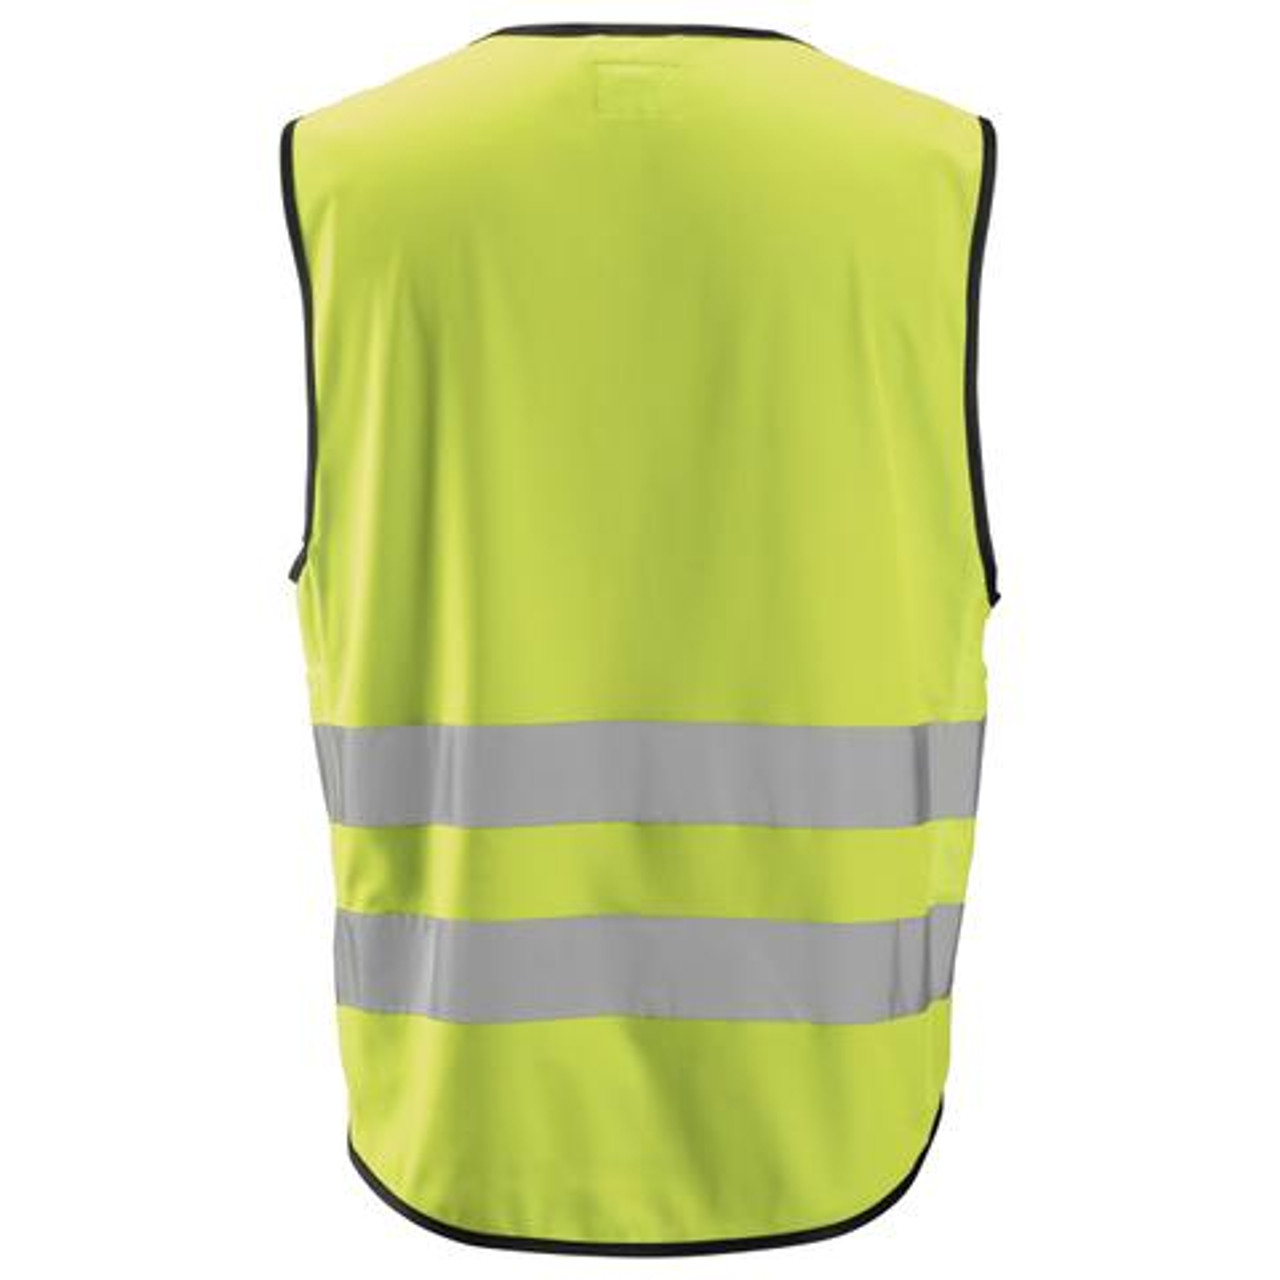 The Snickers Workwear safety vest is good for uniform and branding including heat transfers. Warehouse safety, site safety to meet all matters of protection with high visibility.Snickers Workwear is available in Australia and New Zealand. We get our euro workwear direct from the manufacturer, to offer uniform workwear branding on a large scale, efficiently.